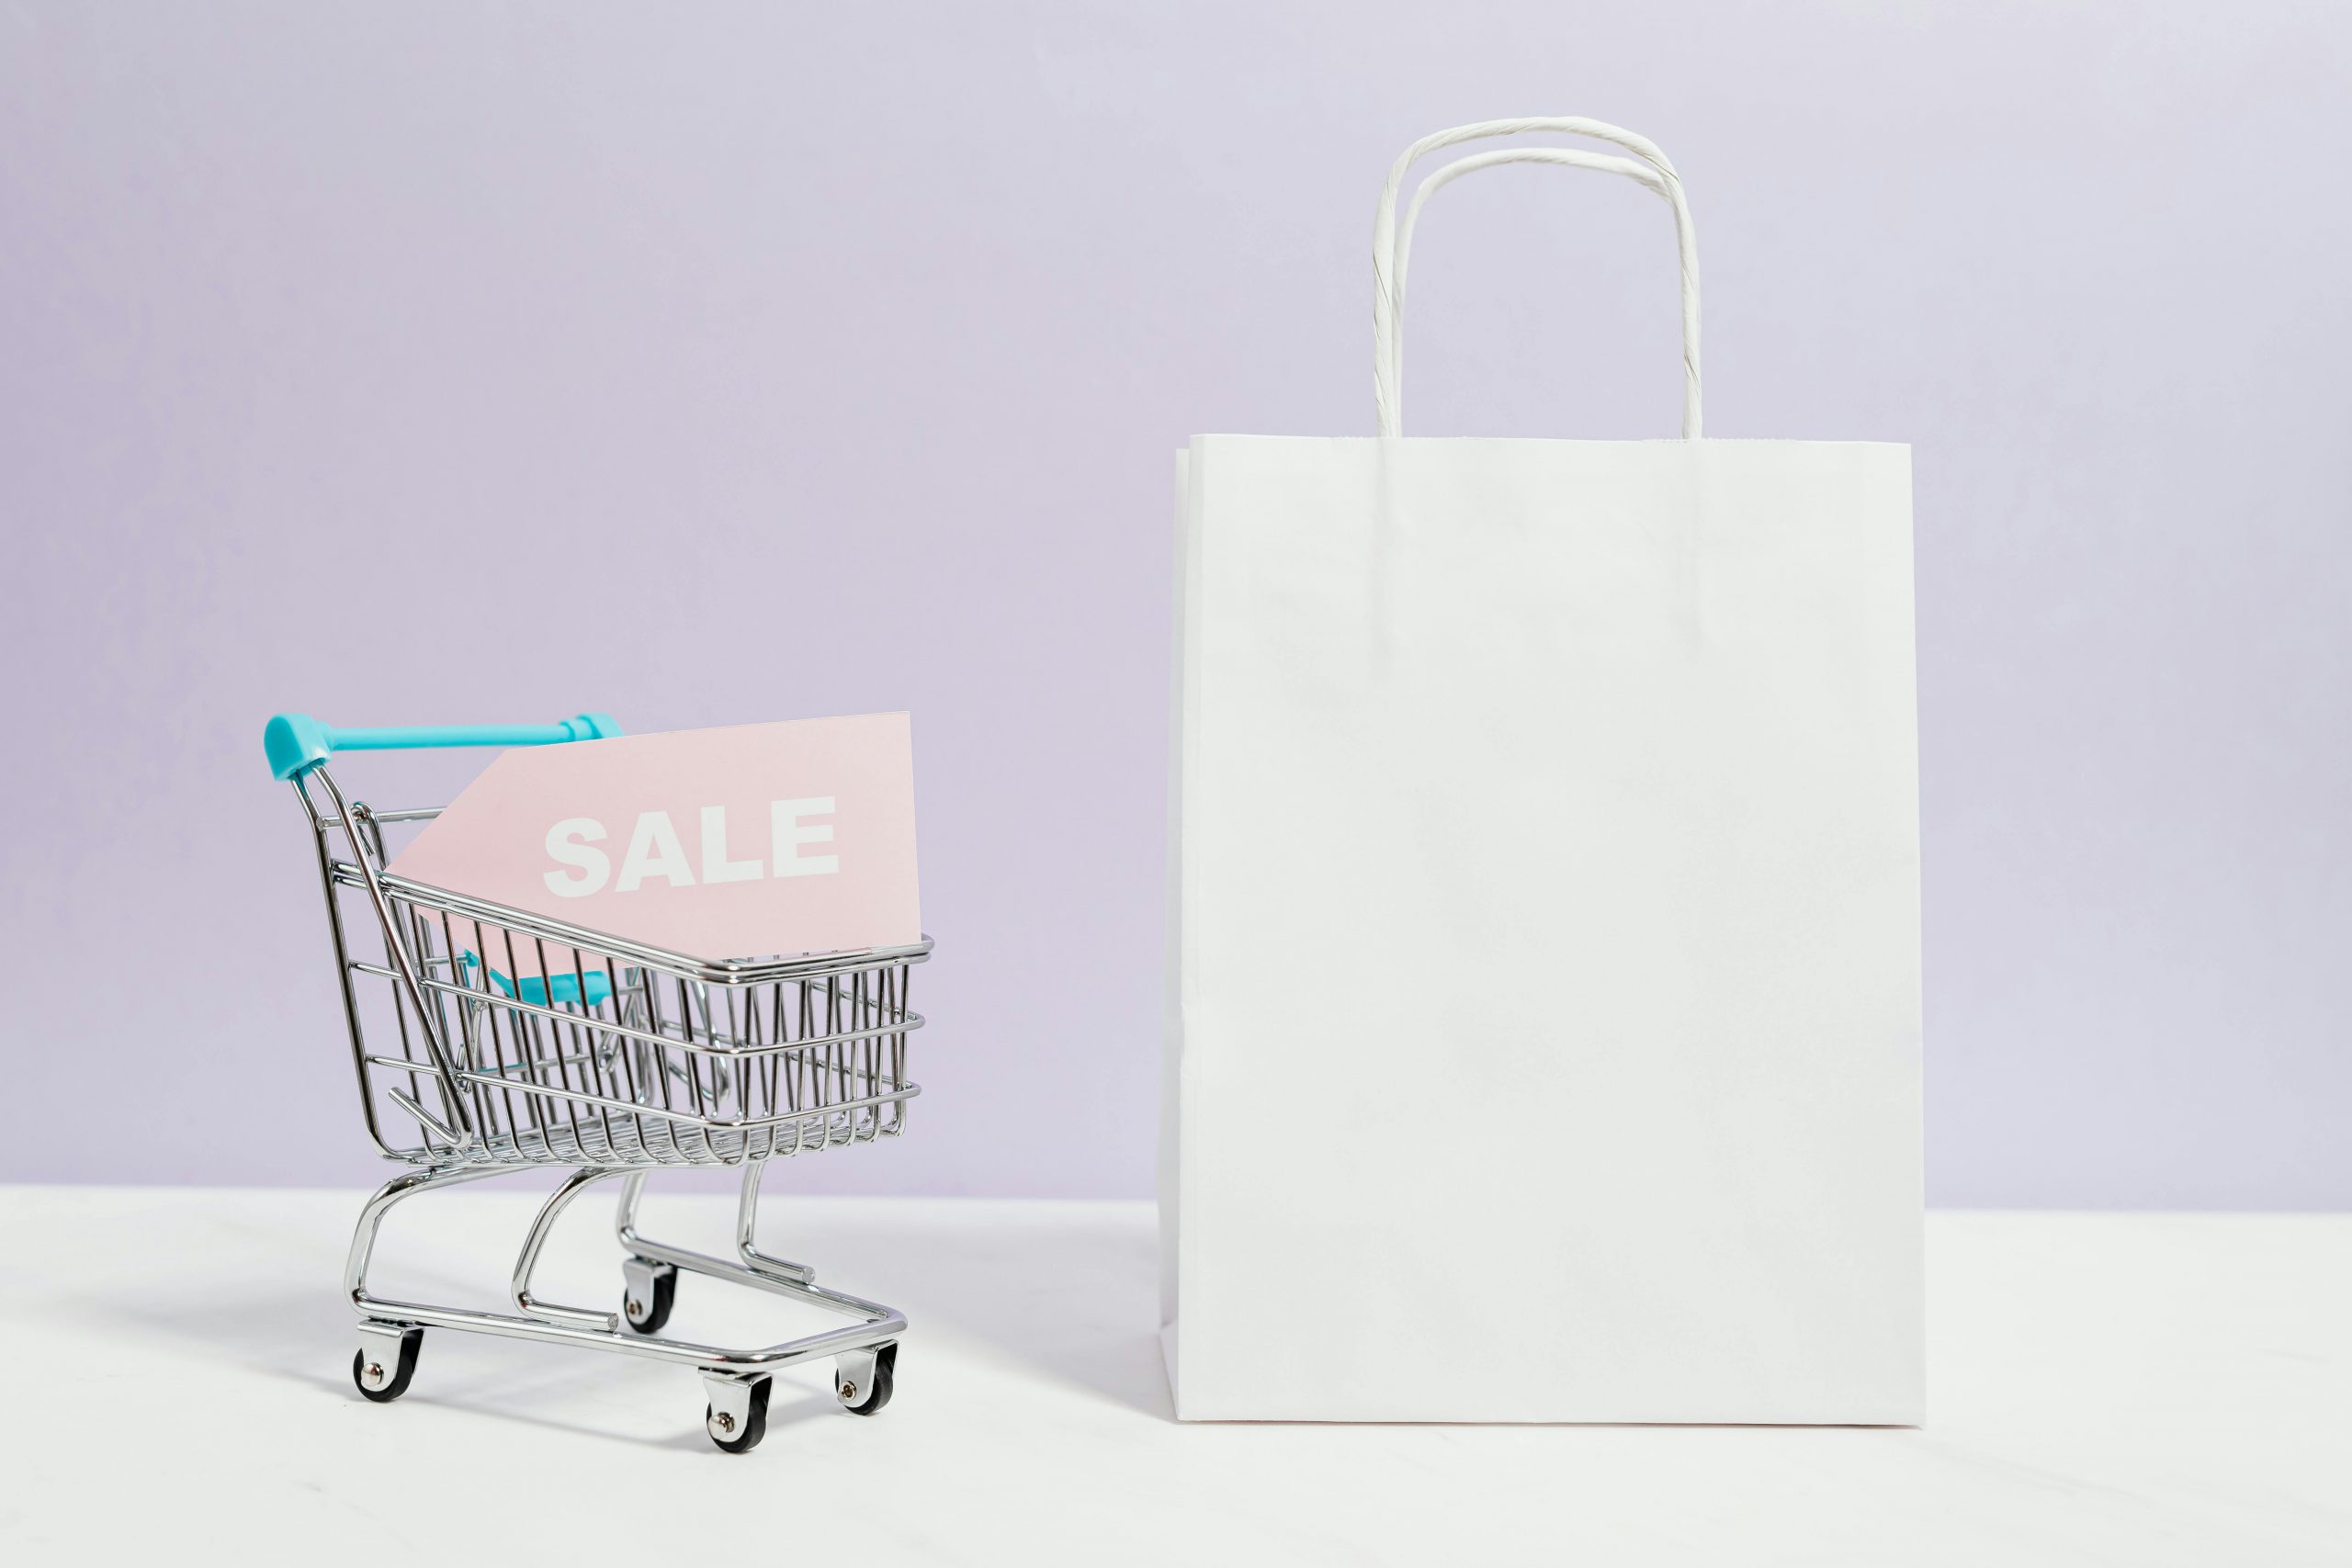 image of shopping cart with sale sign and a white gift bag